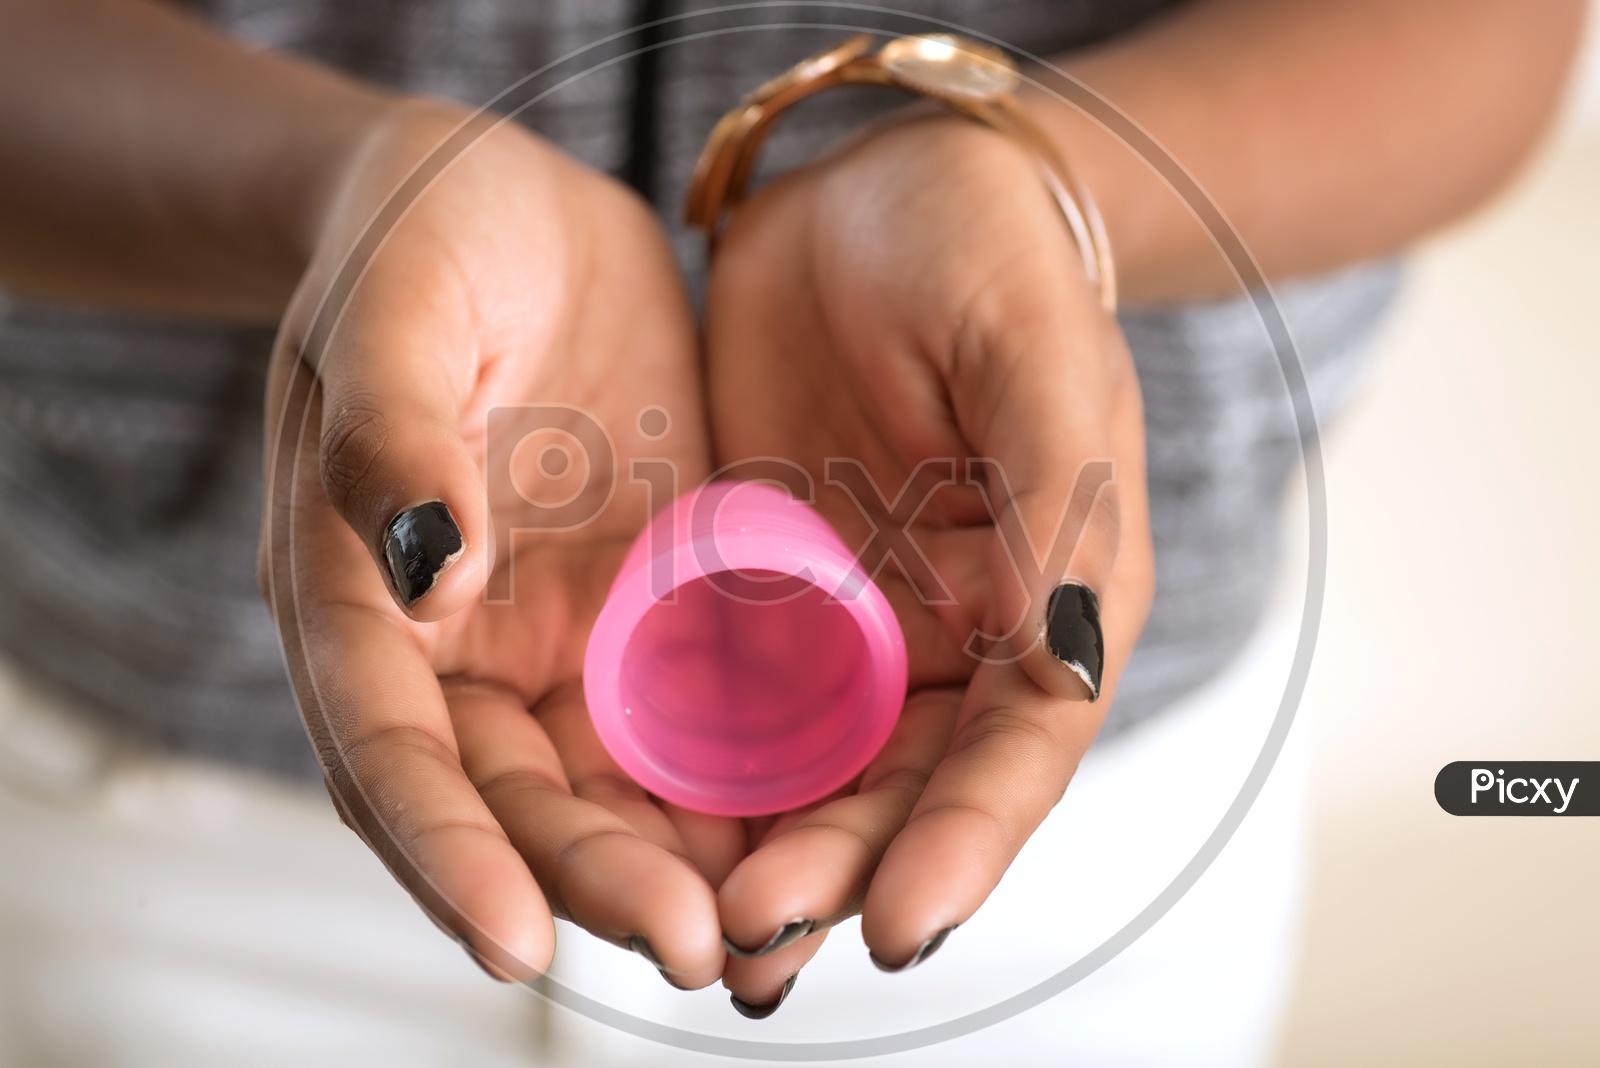 Menstrual Cup in the hands of a Indian Woman